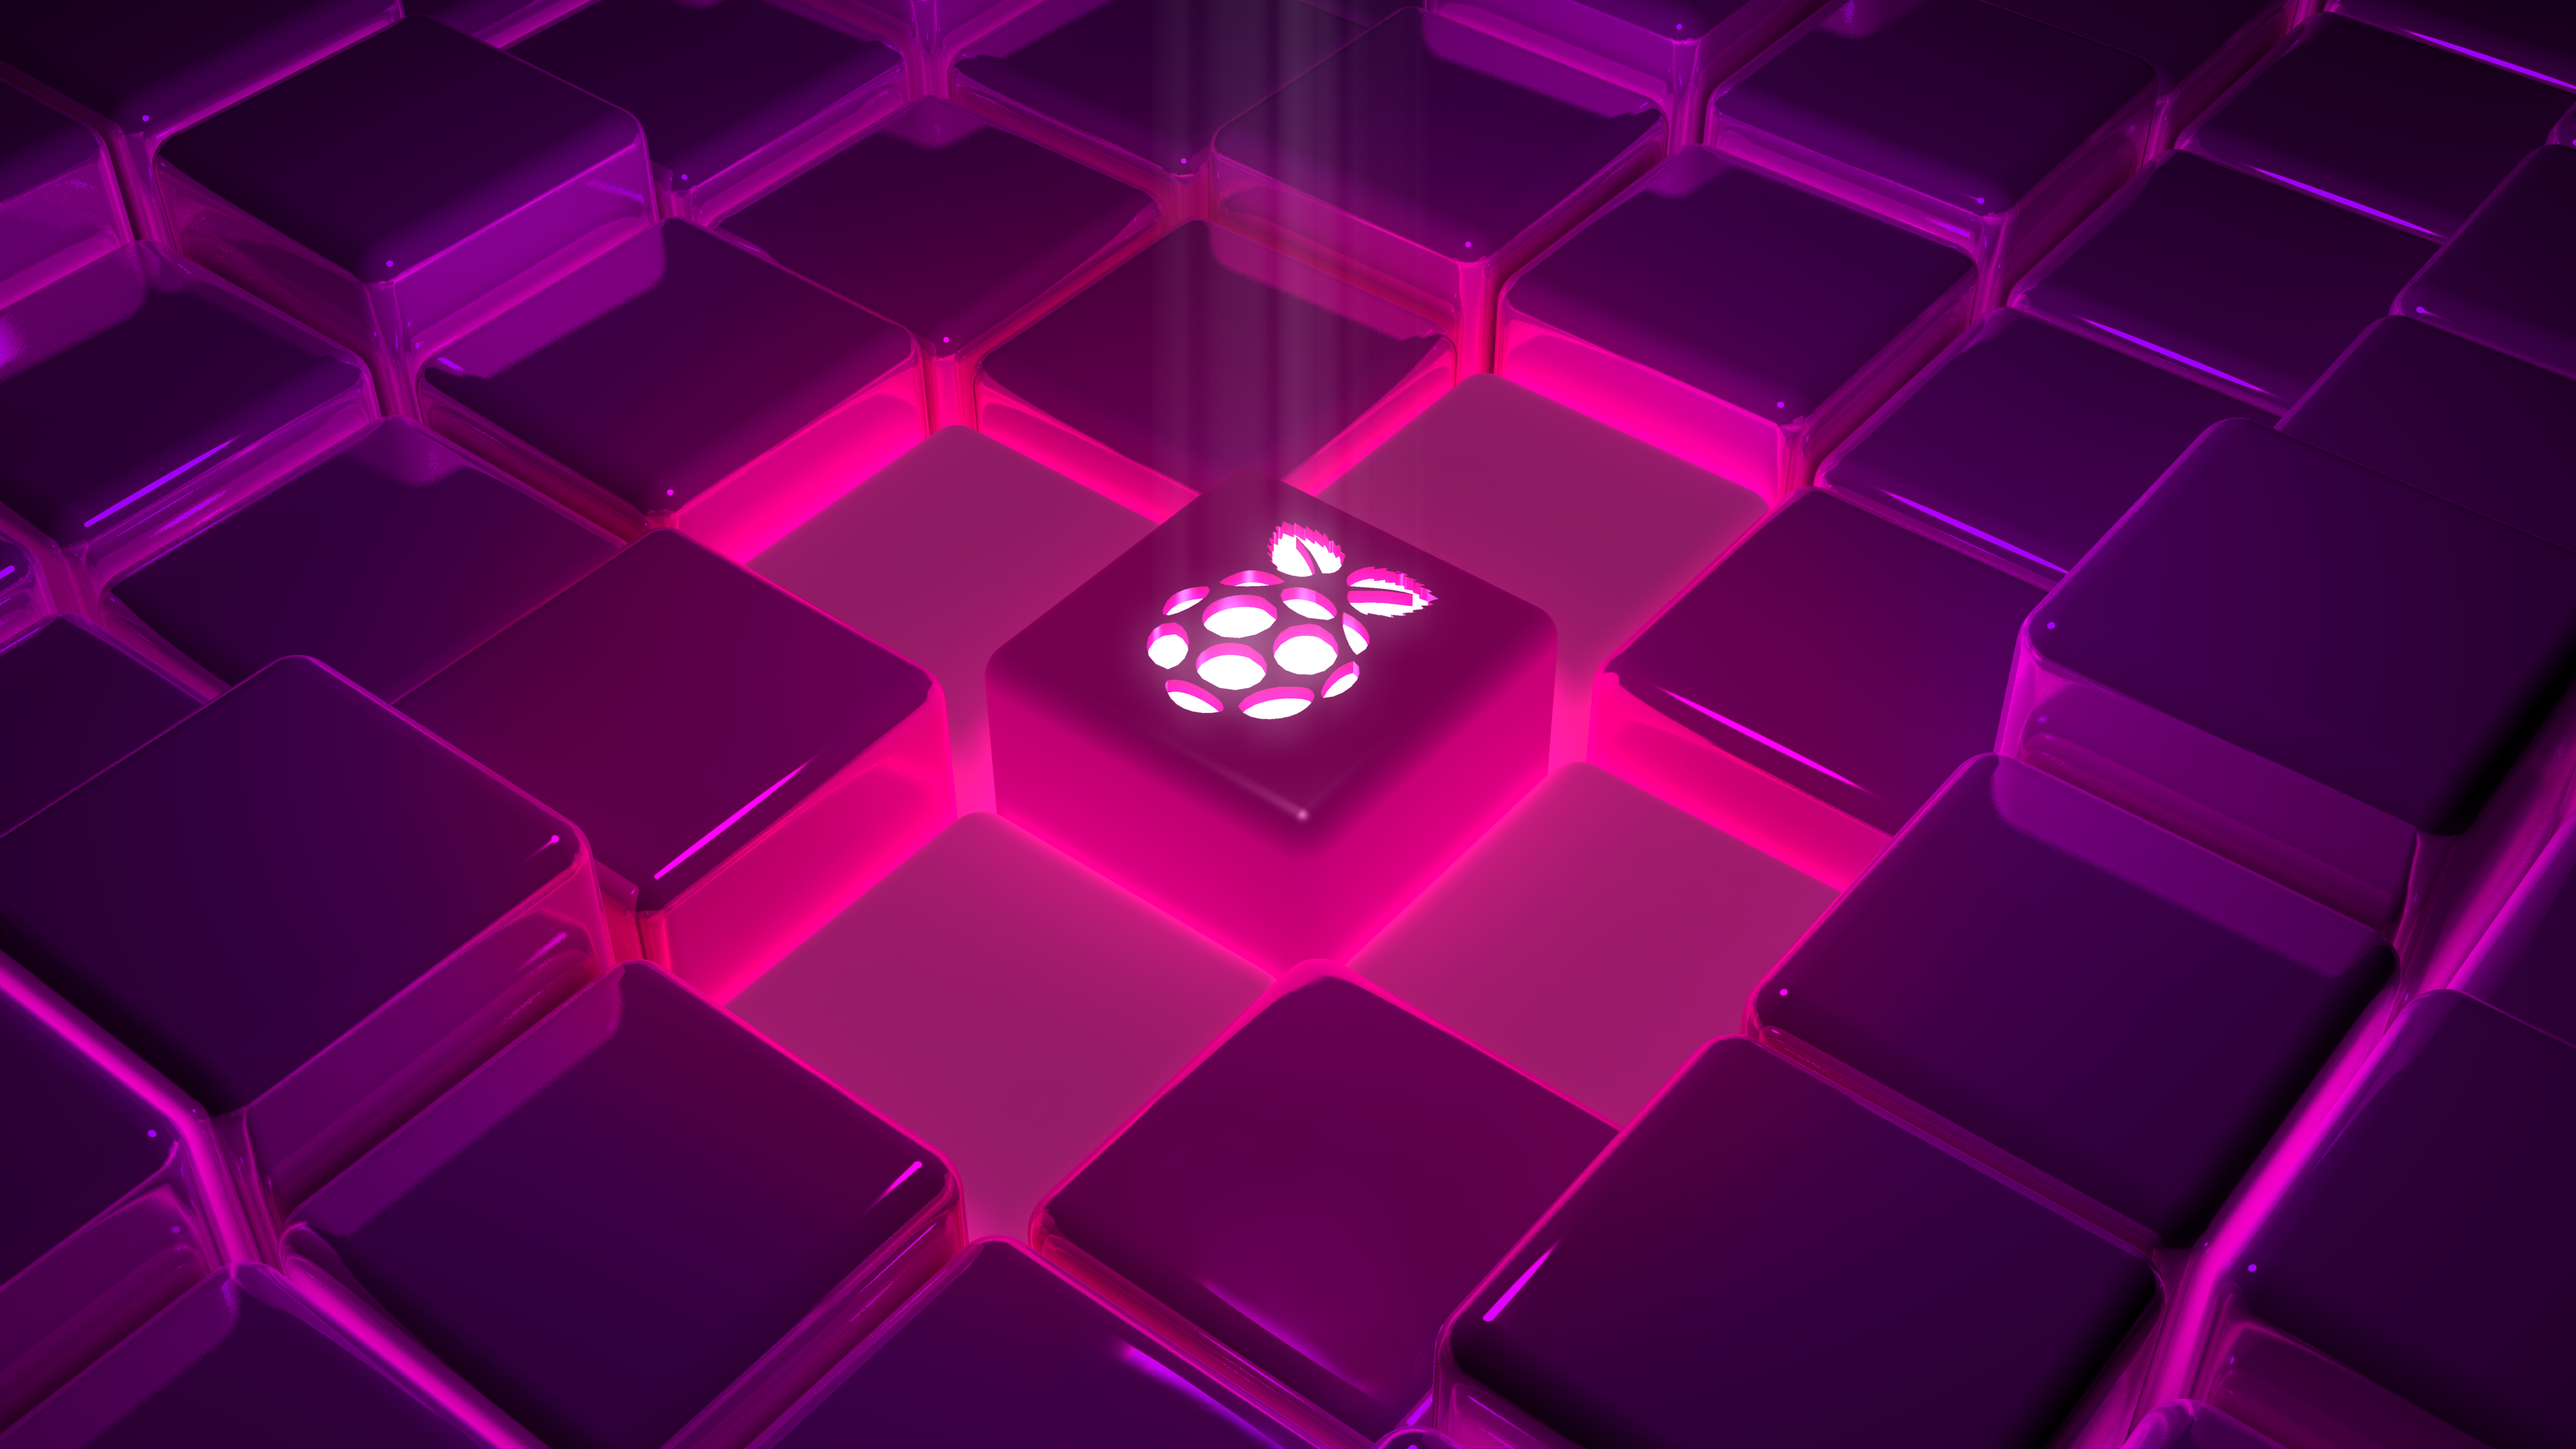 Abstract Minimalism Raspberry Pi Cubism Cubic Neon 3D Abstract Onix5 3840x2160